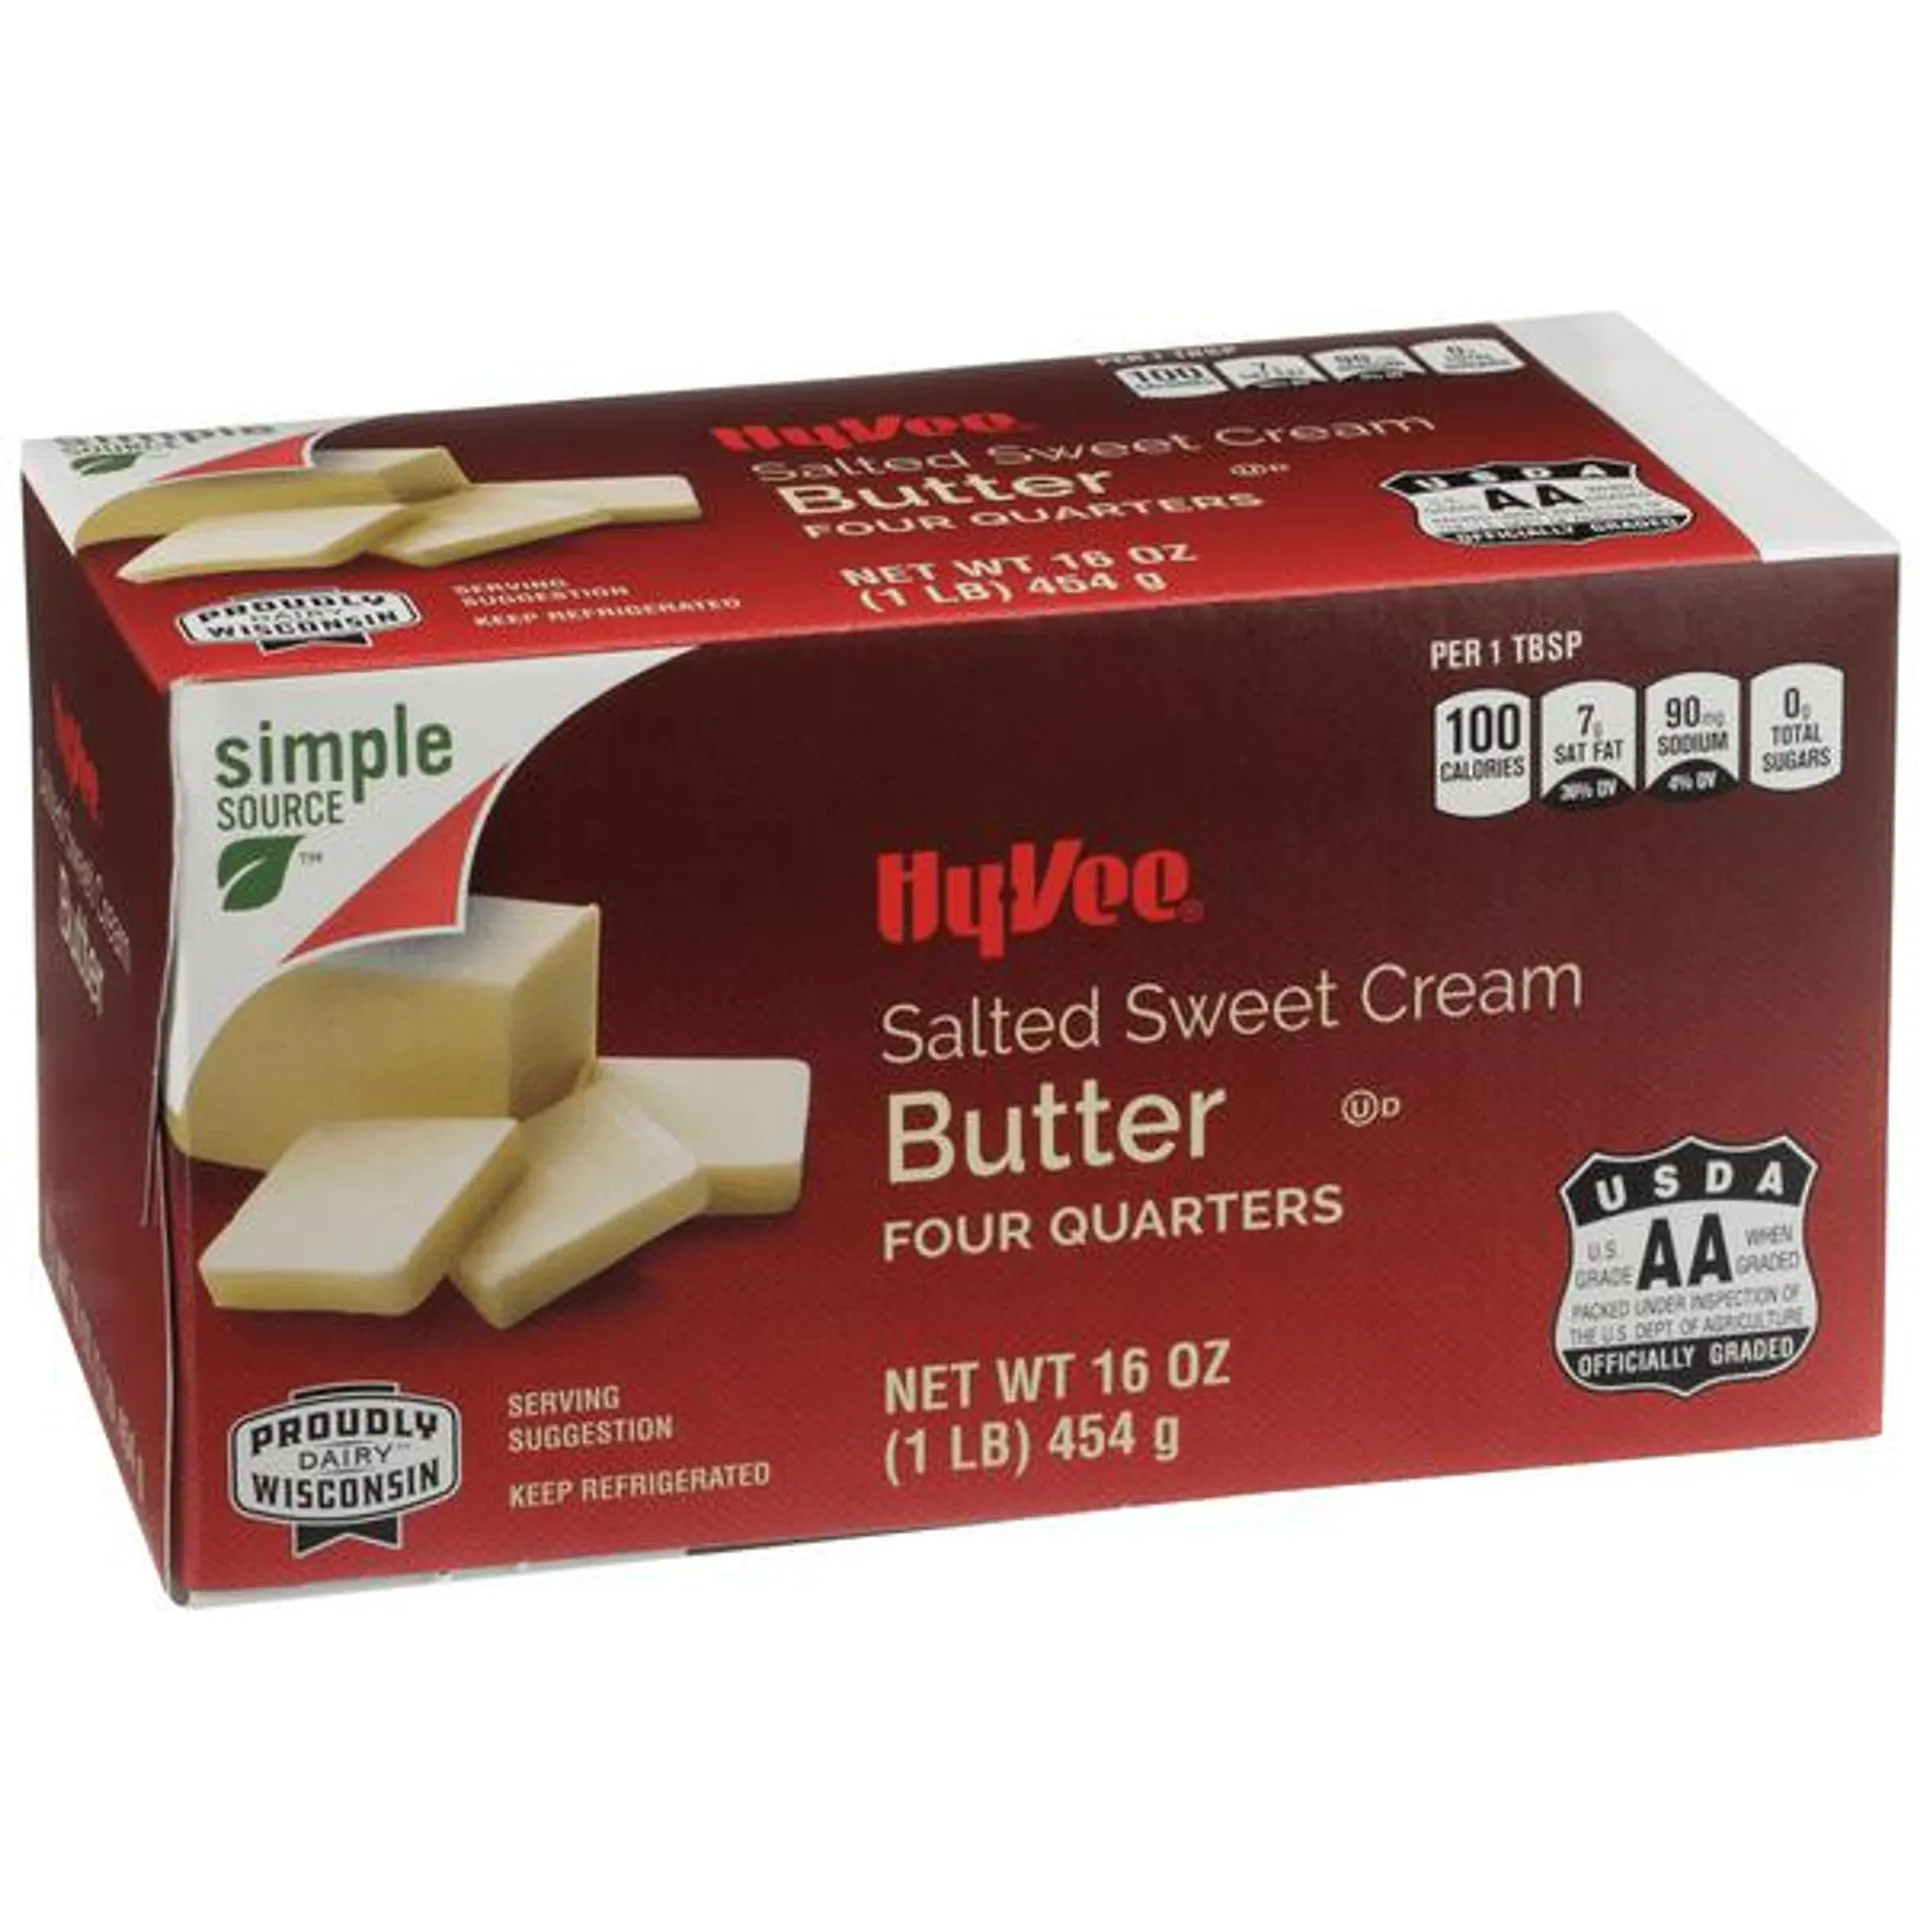 Hy-Vee Sweet Cream Salted Butter Quarters